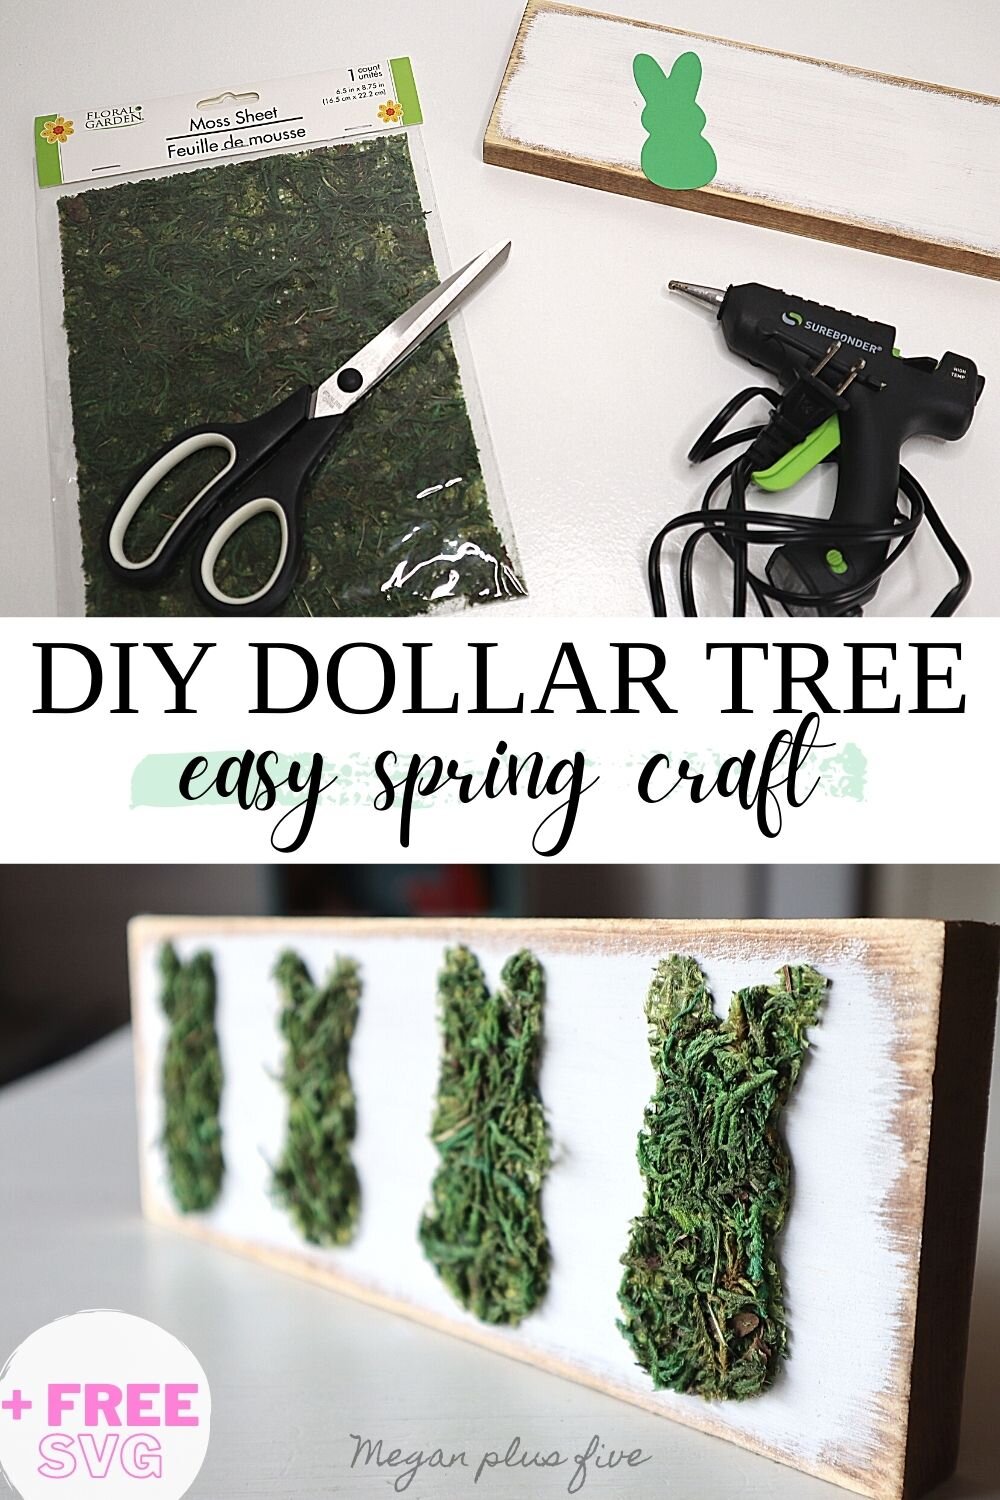 DIY spring Easter Dollar Tree craft, easy and simple peep bunny craft made out of sheet moss. Frugal Easter craft for spring using your Cricut or vinyl cutting machine. Scrap wood craft project